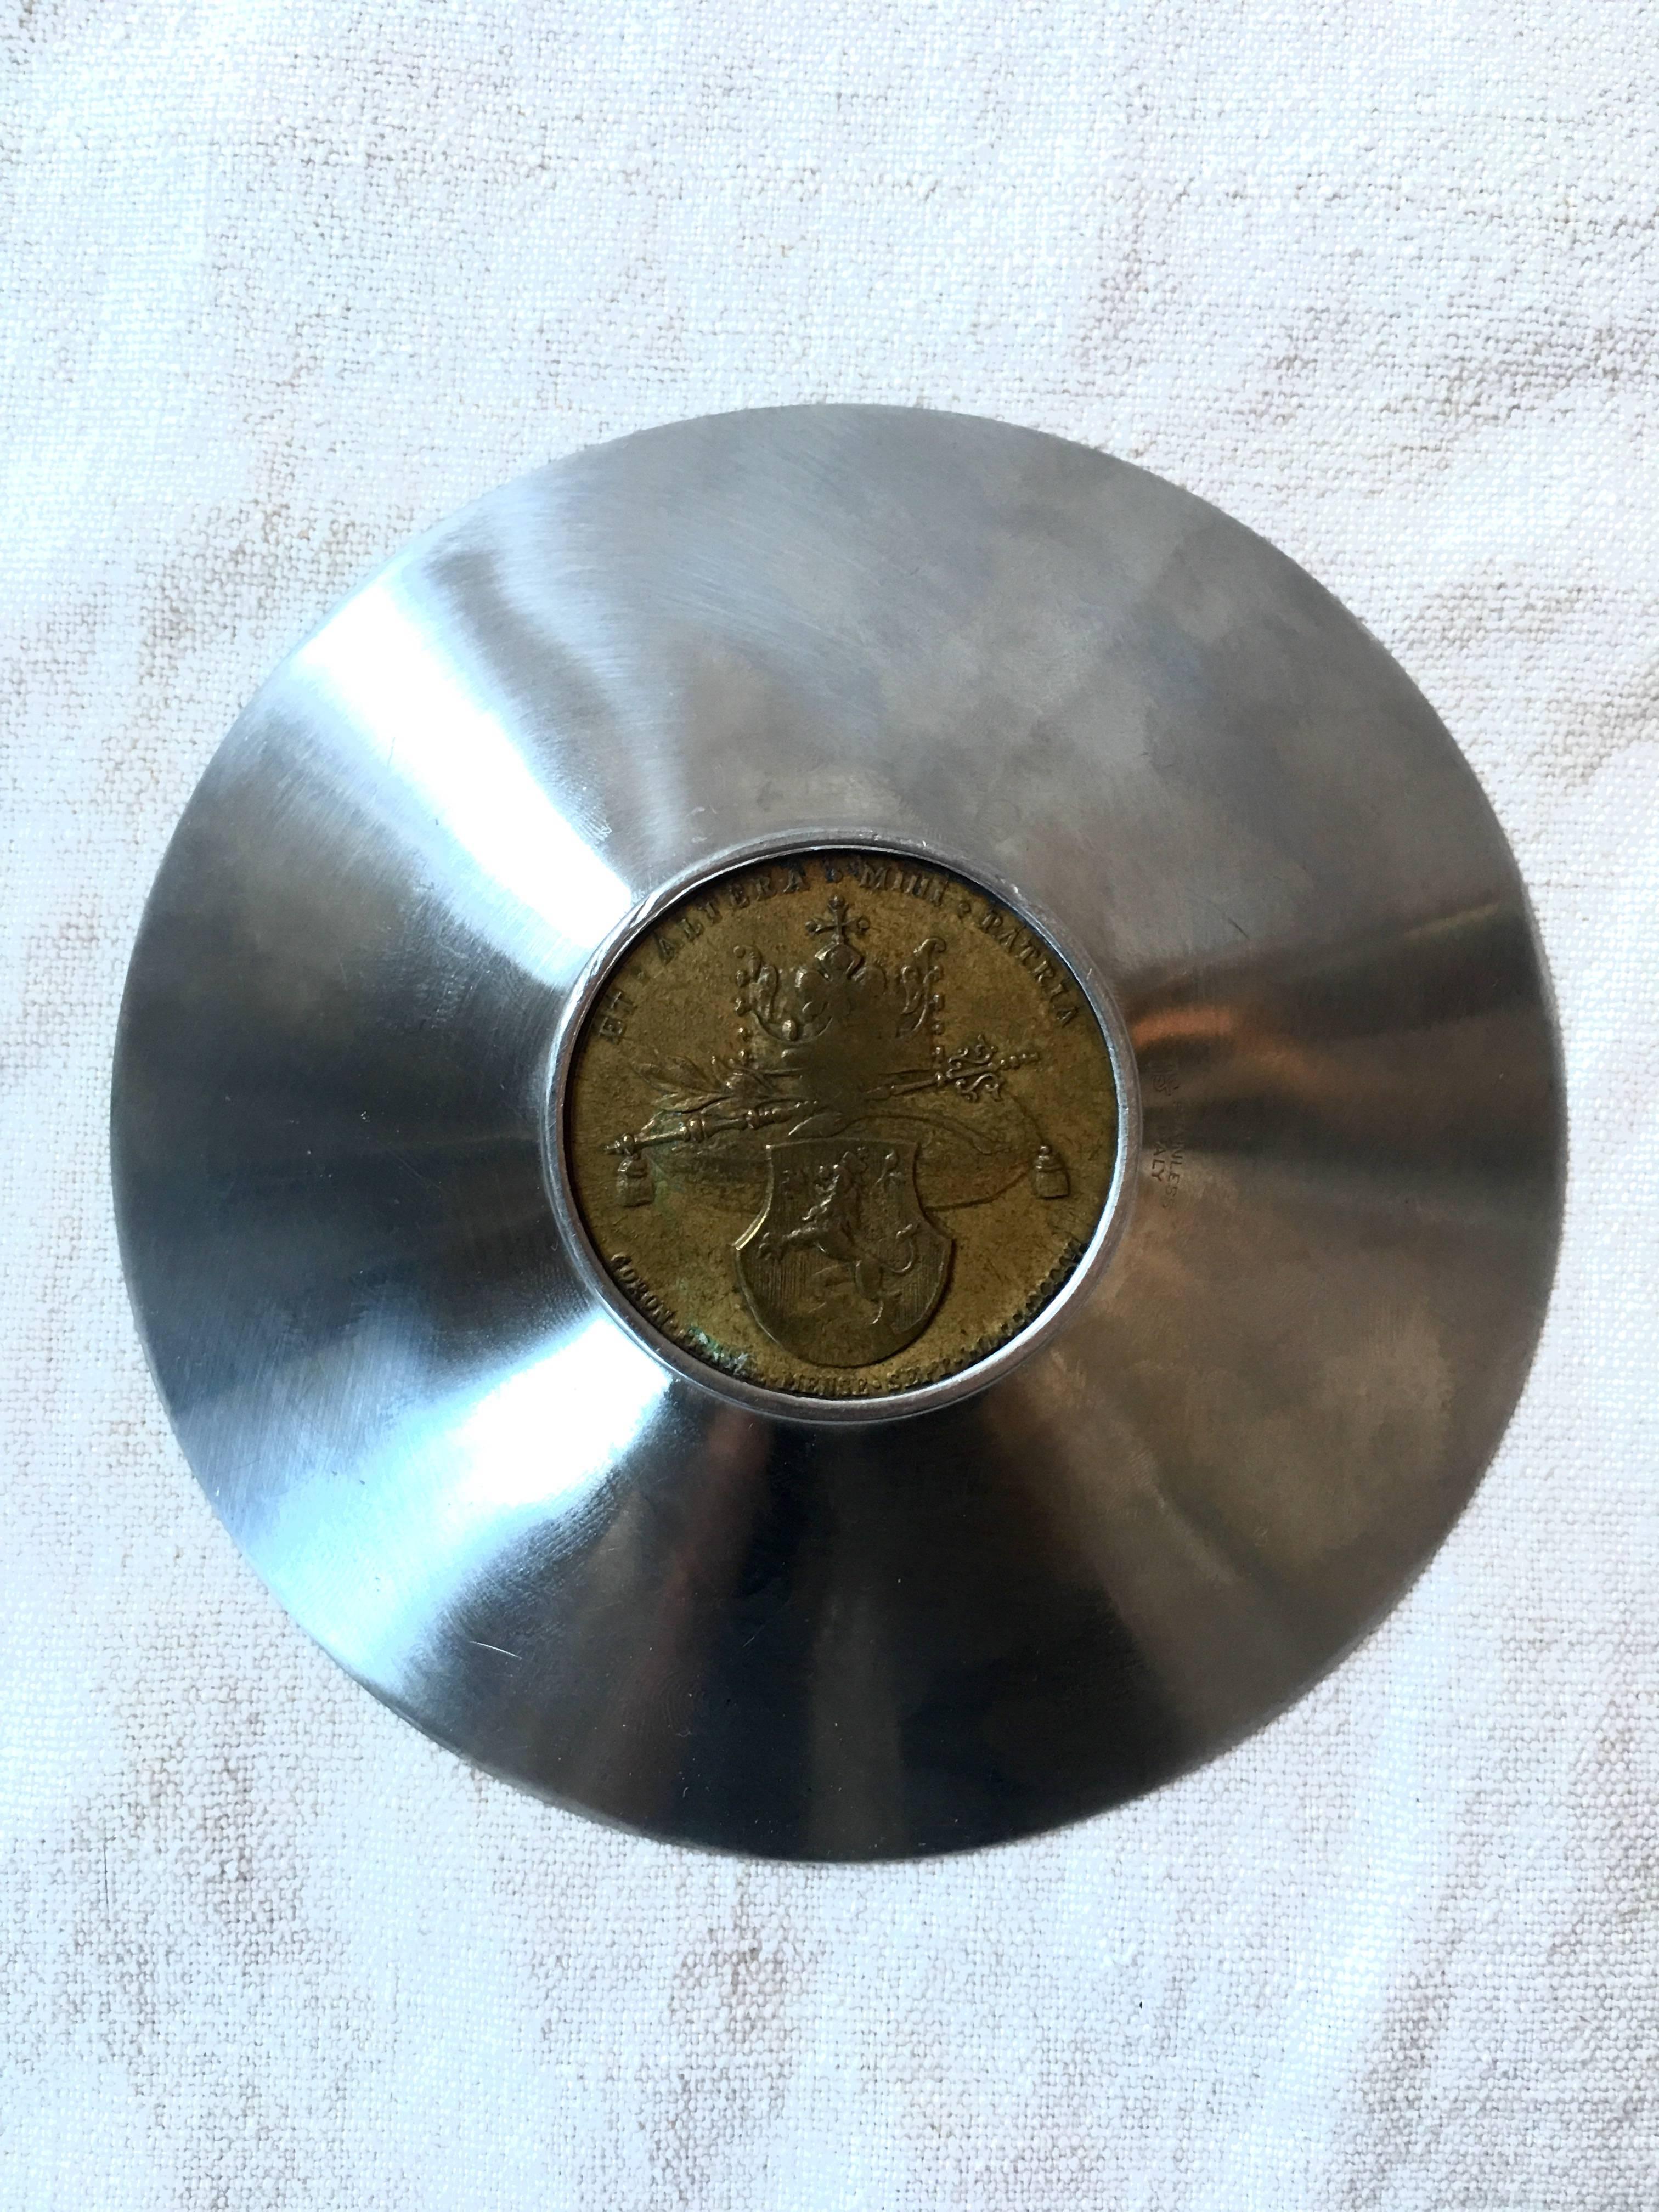 Italian metal bowl made of stainless steel and a large vintage coin.